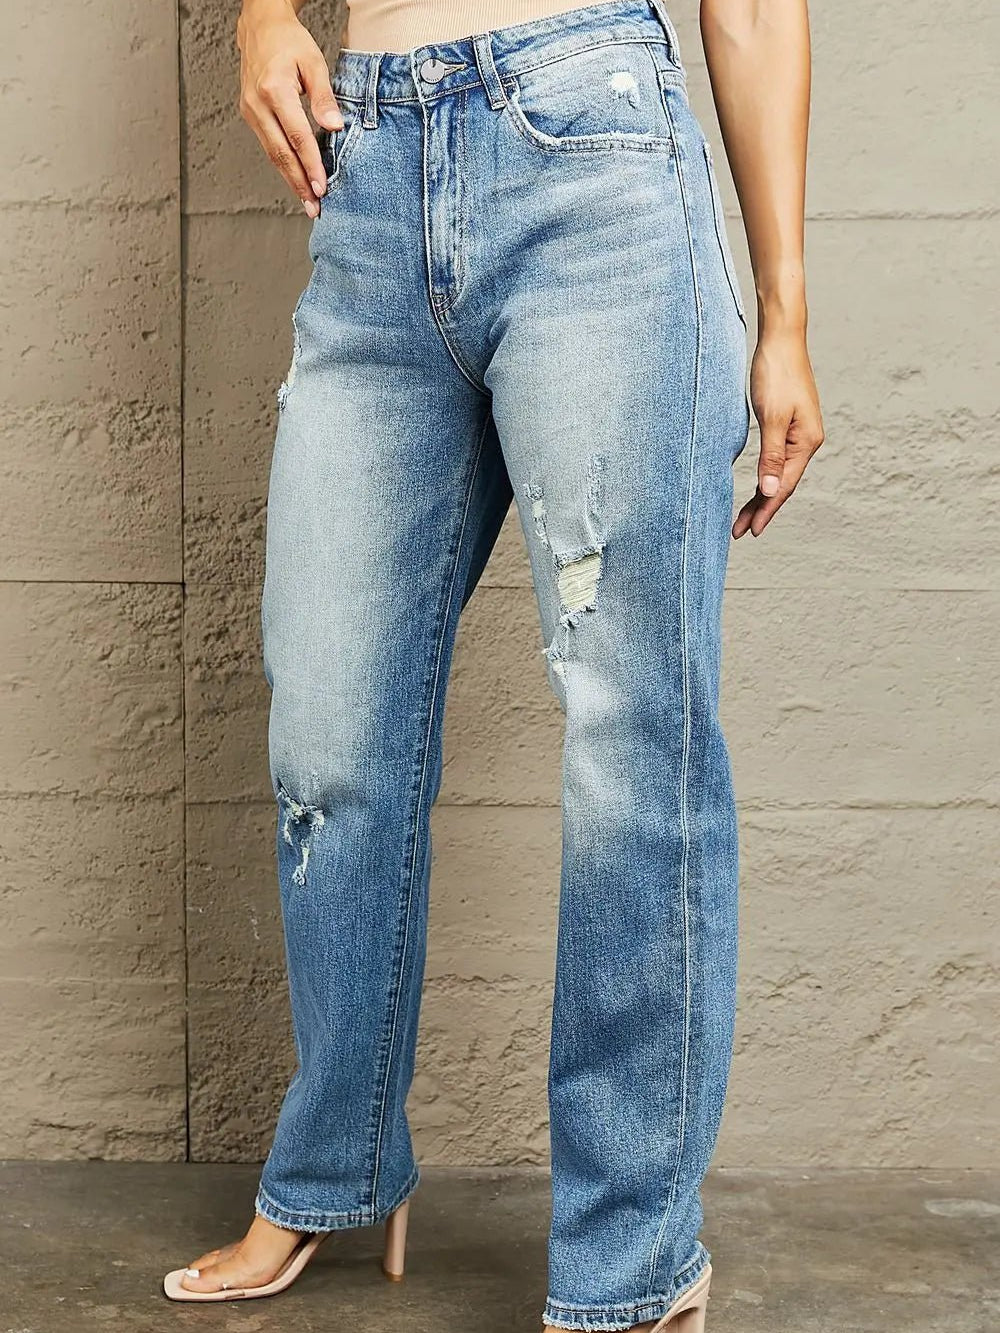 HIGH WAISTED FASHION TRENDS STRAIGHT LEG JEANS - MeadeuxHIGH WAISTED FASHION TRENDS STRAIGHT LEG JEANSJeansMeadeux